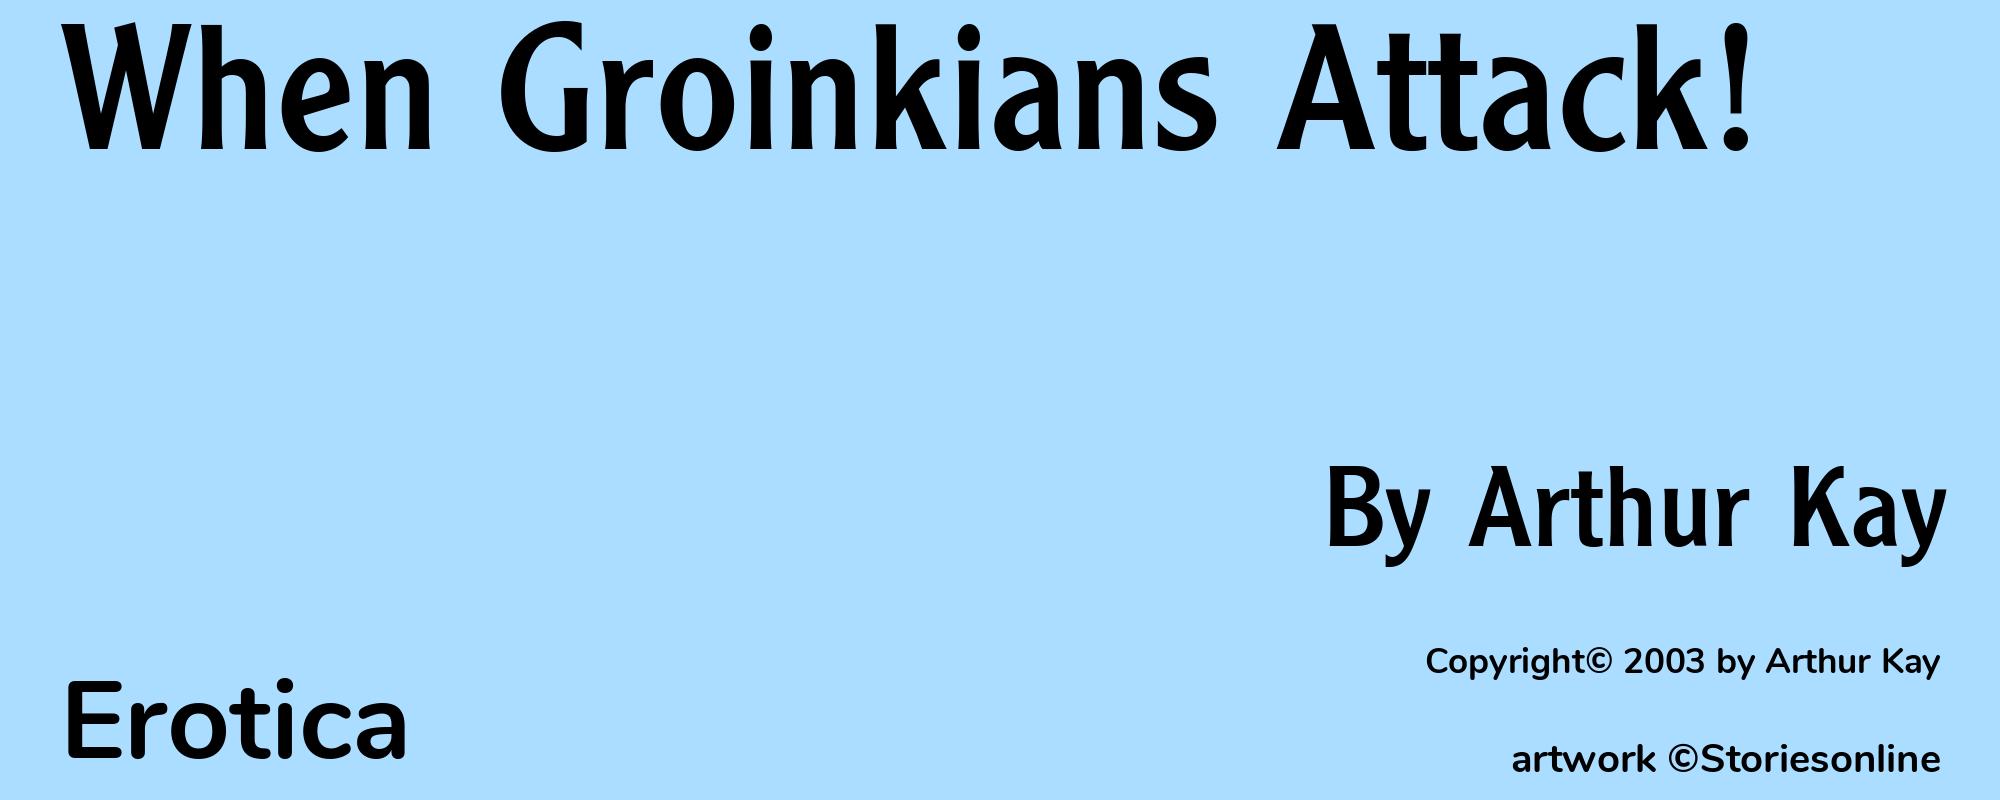 When Groinkians Attack! - Cover